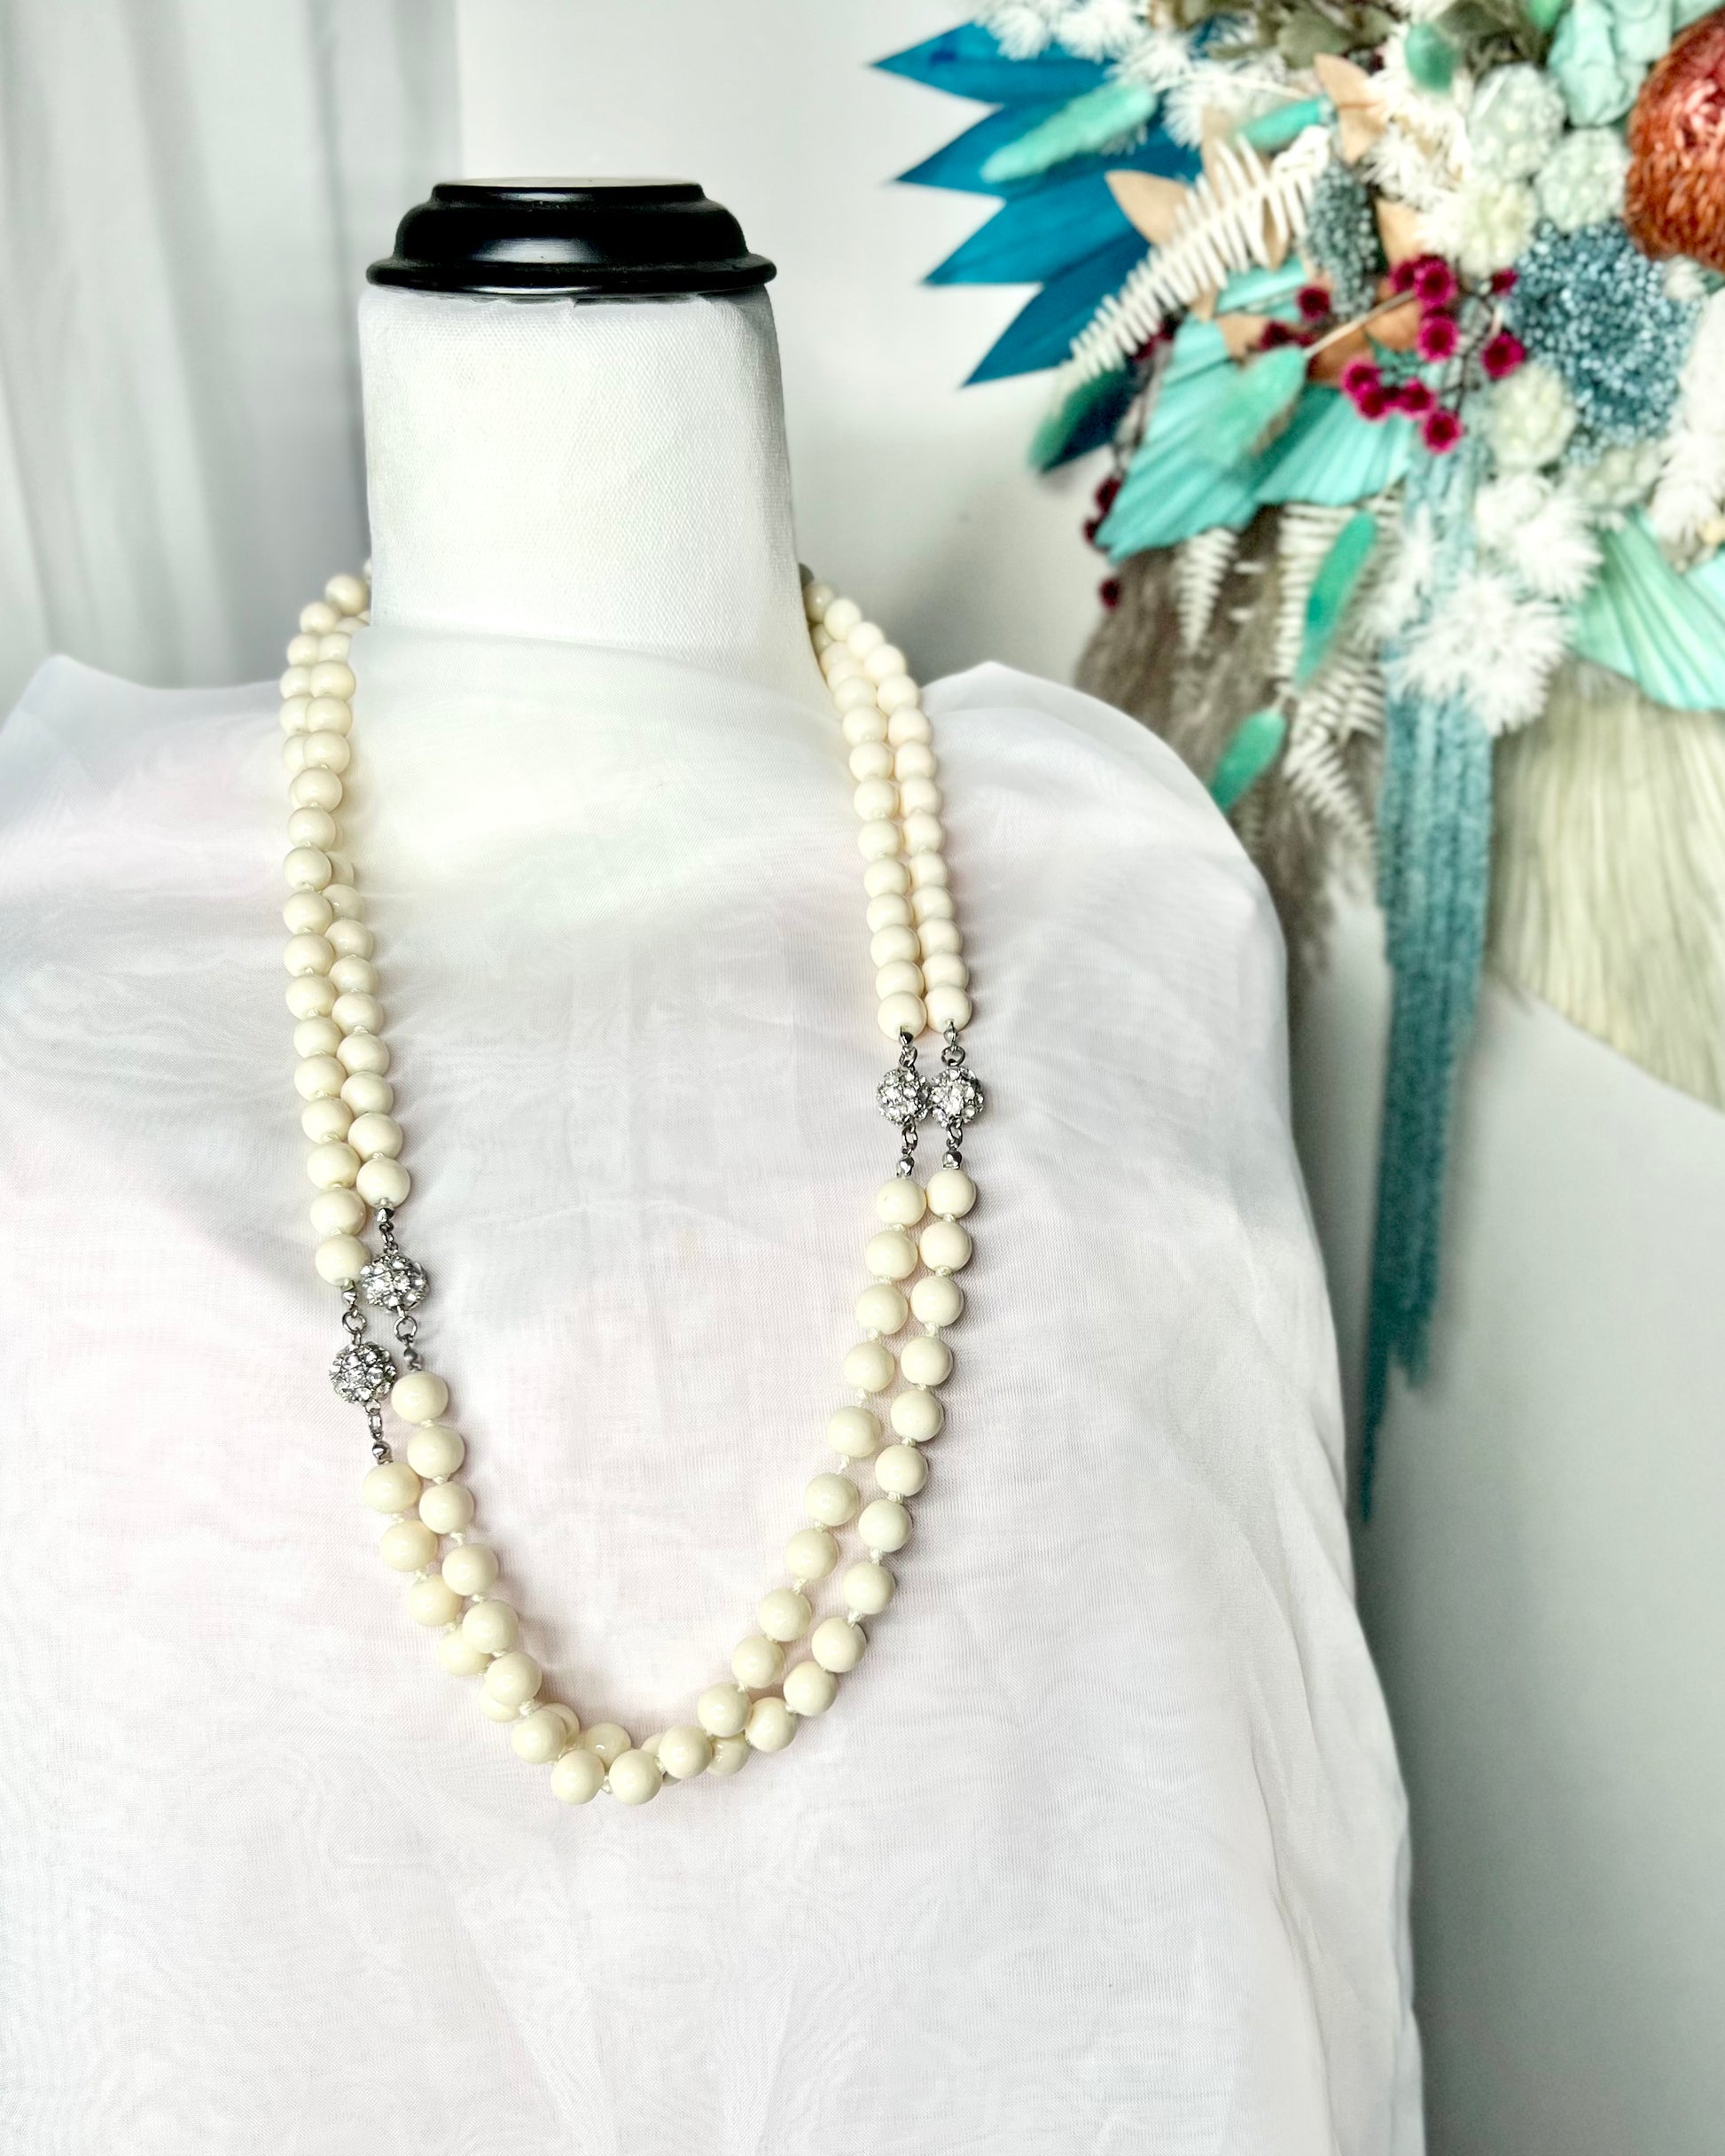 Gatsby Necklace - Cream Bling: Our beaded necklaces are the perfect addition to your next Gatsby inspired event. These gorgeous designs can also be incorporated into modern outfit
Length: 167cm
St - Ciao Bella Dresses 